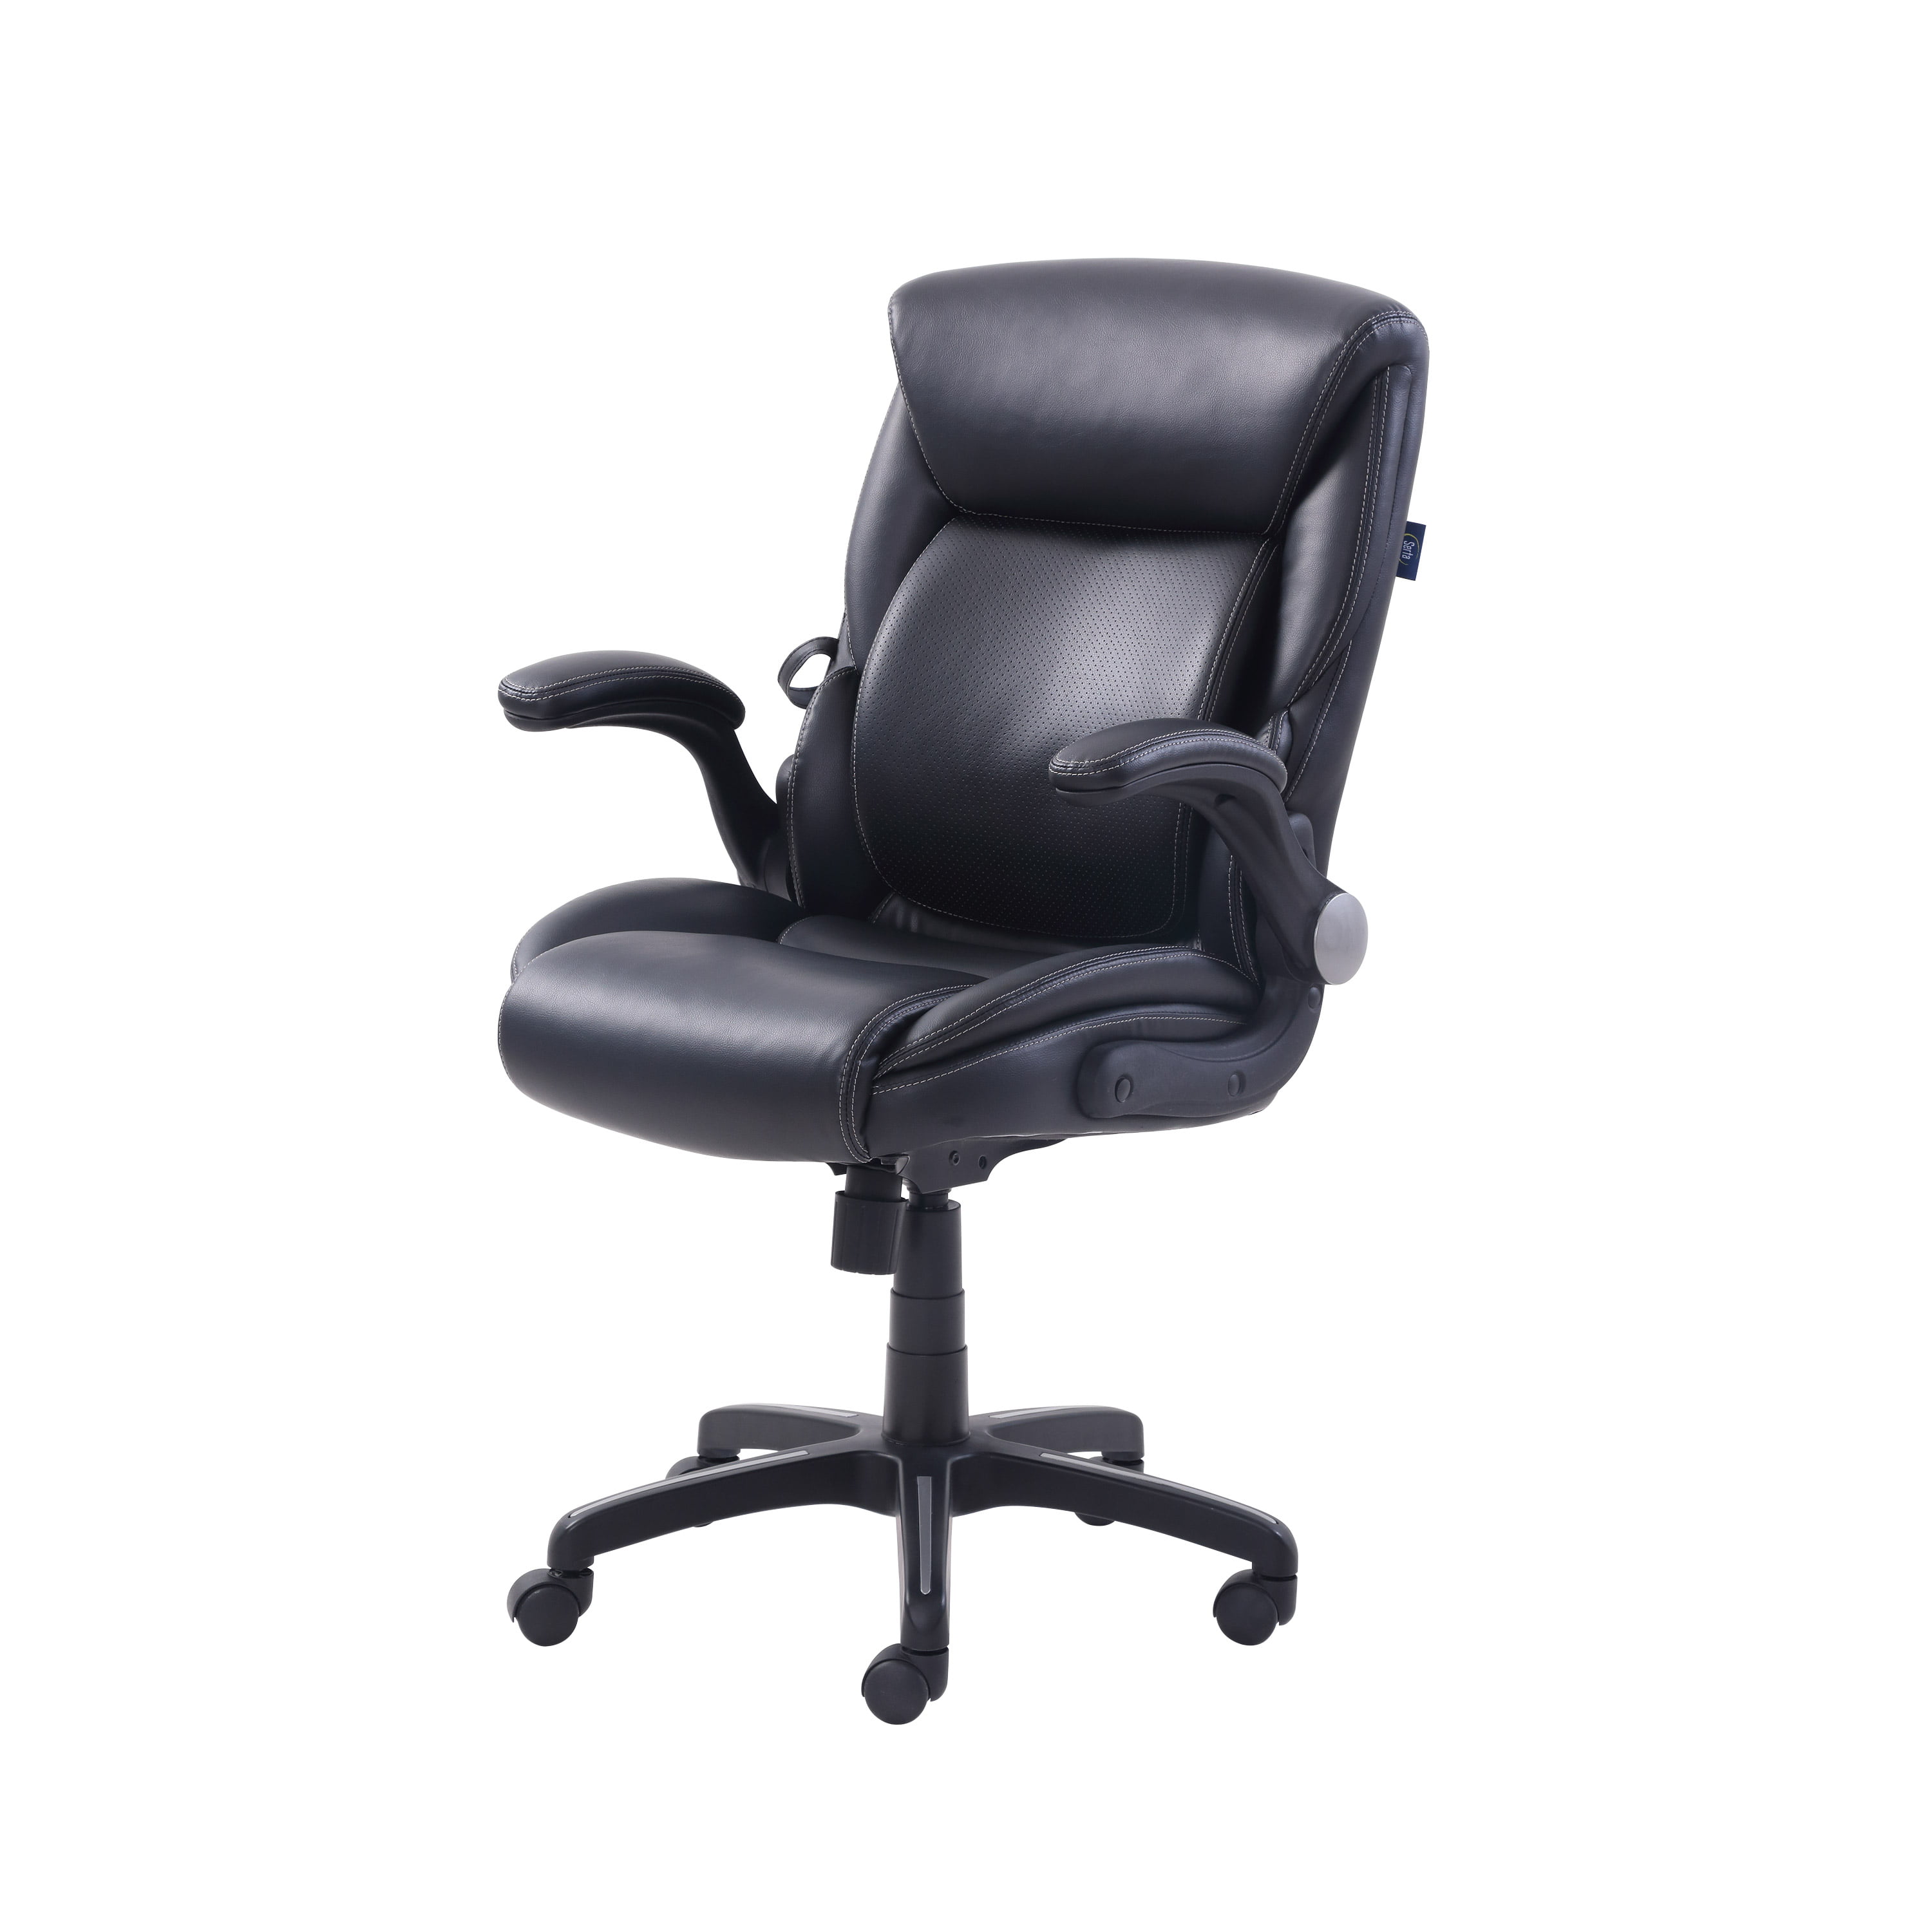 Black Bonded Leather Serta Office Chair with Lumbar Support